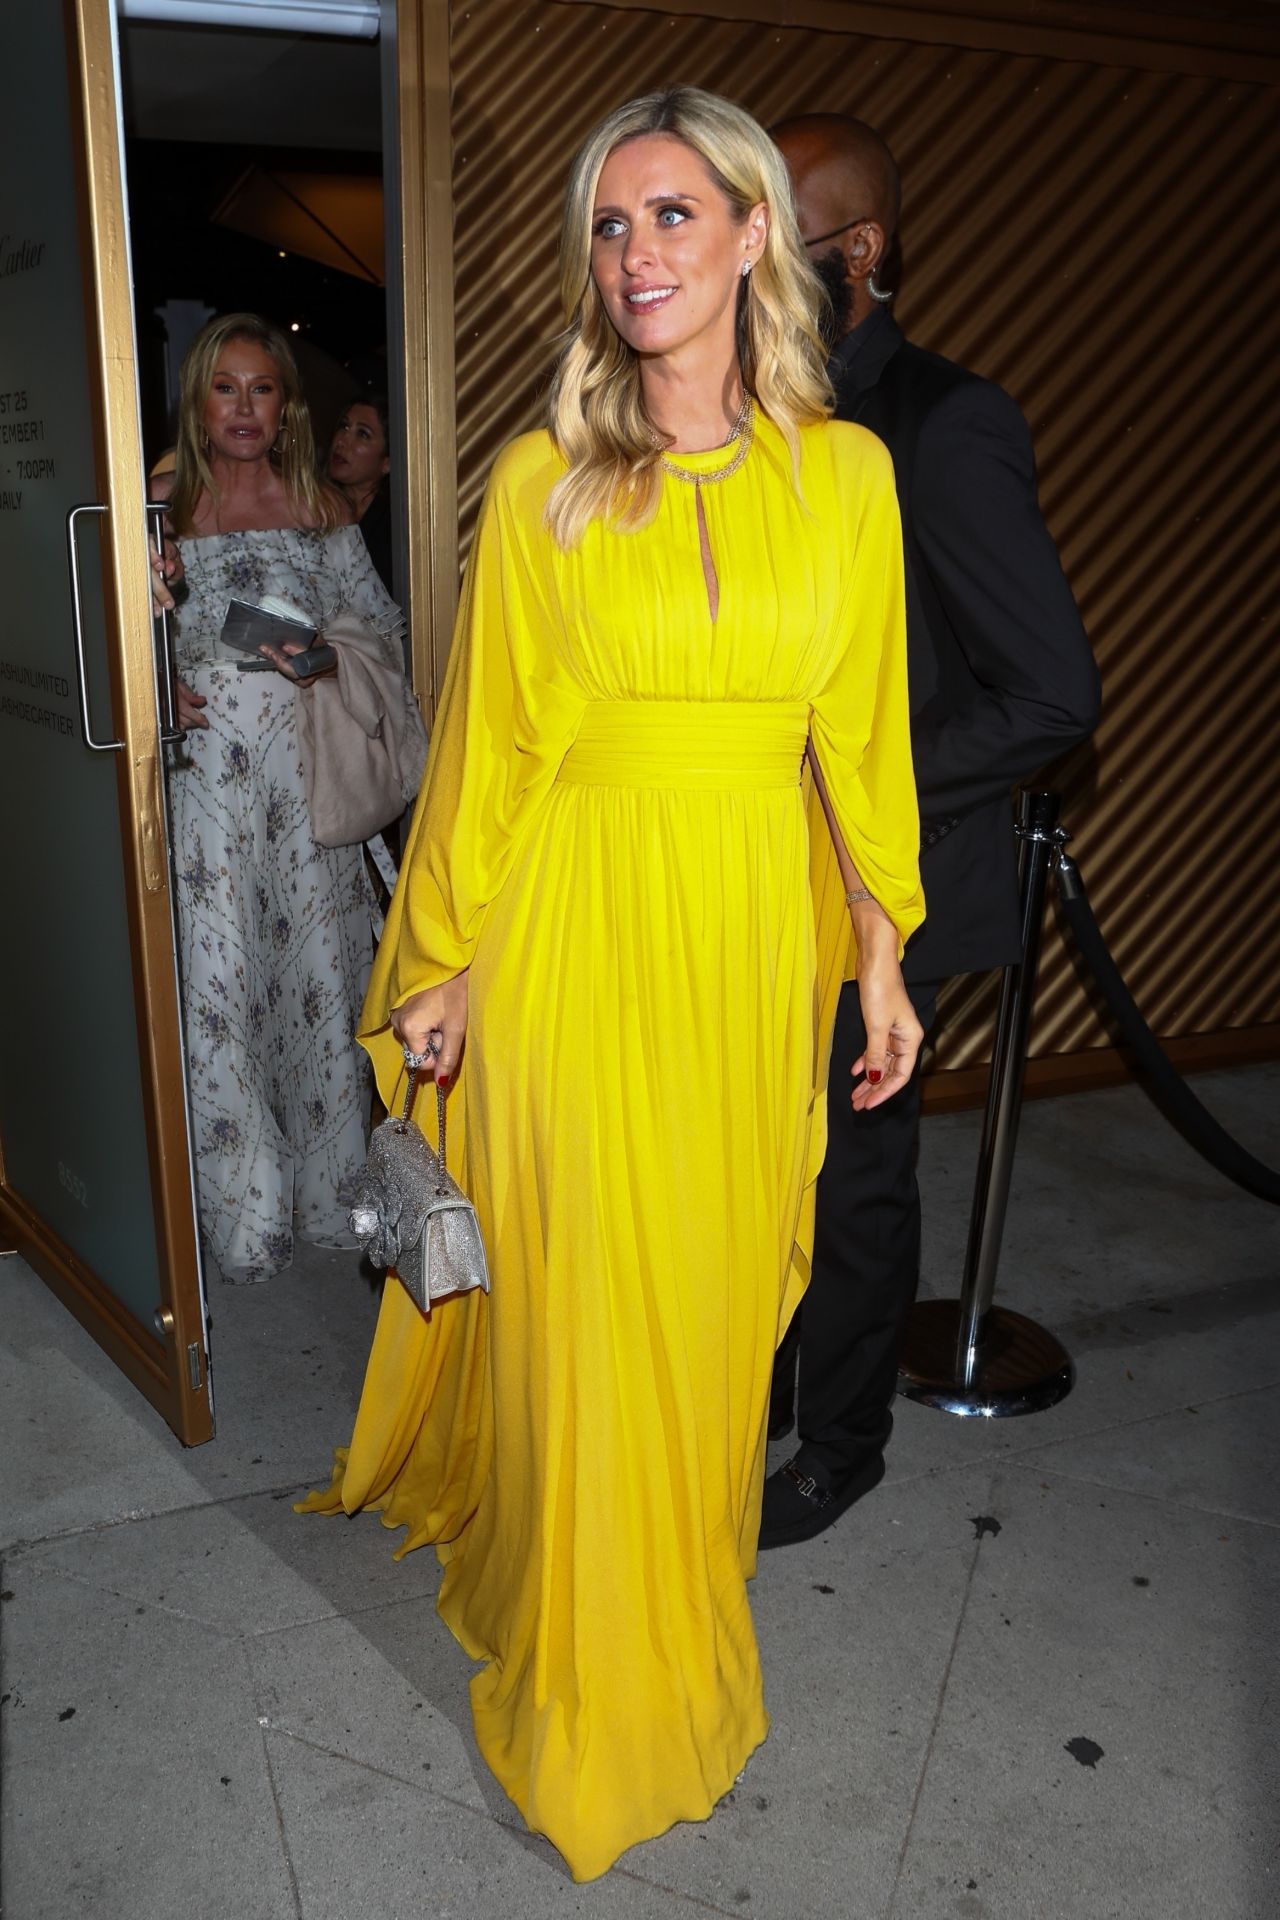 Nicky Hilton in a Yellow Dress - Cartier Event in LA 08/24/2021 ...